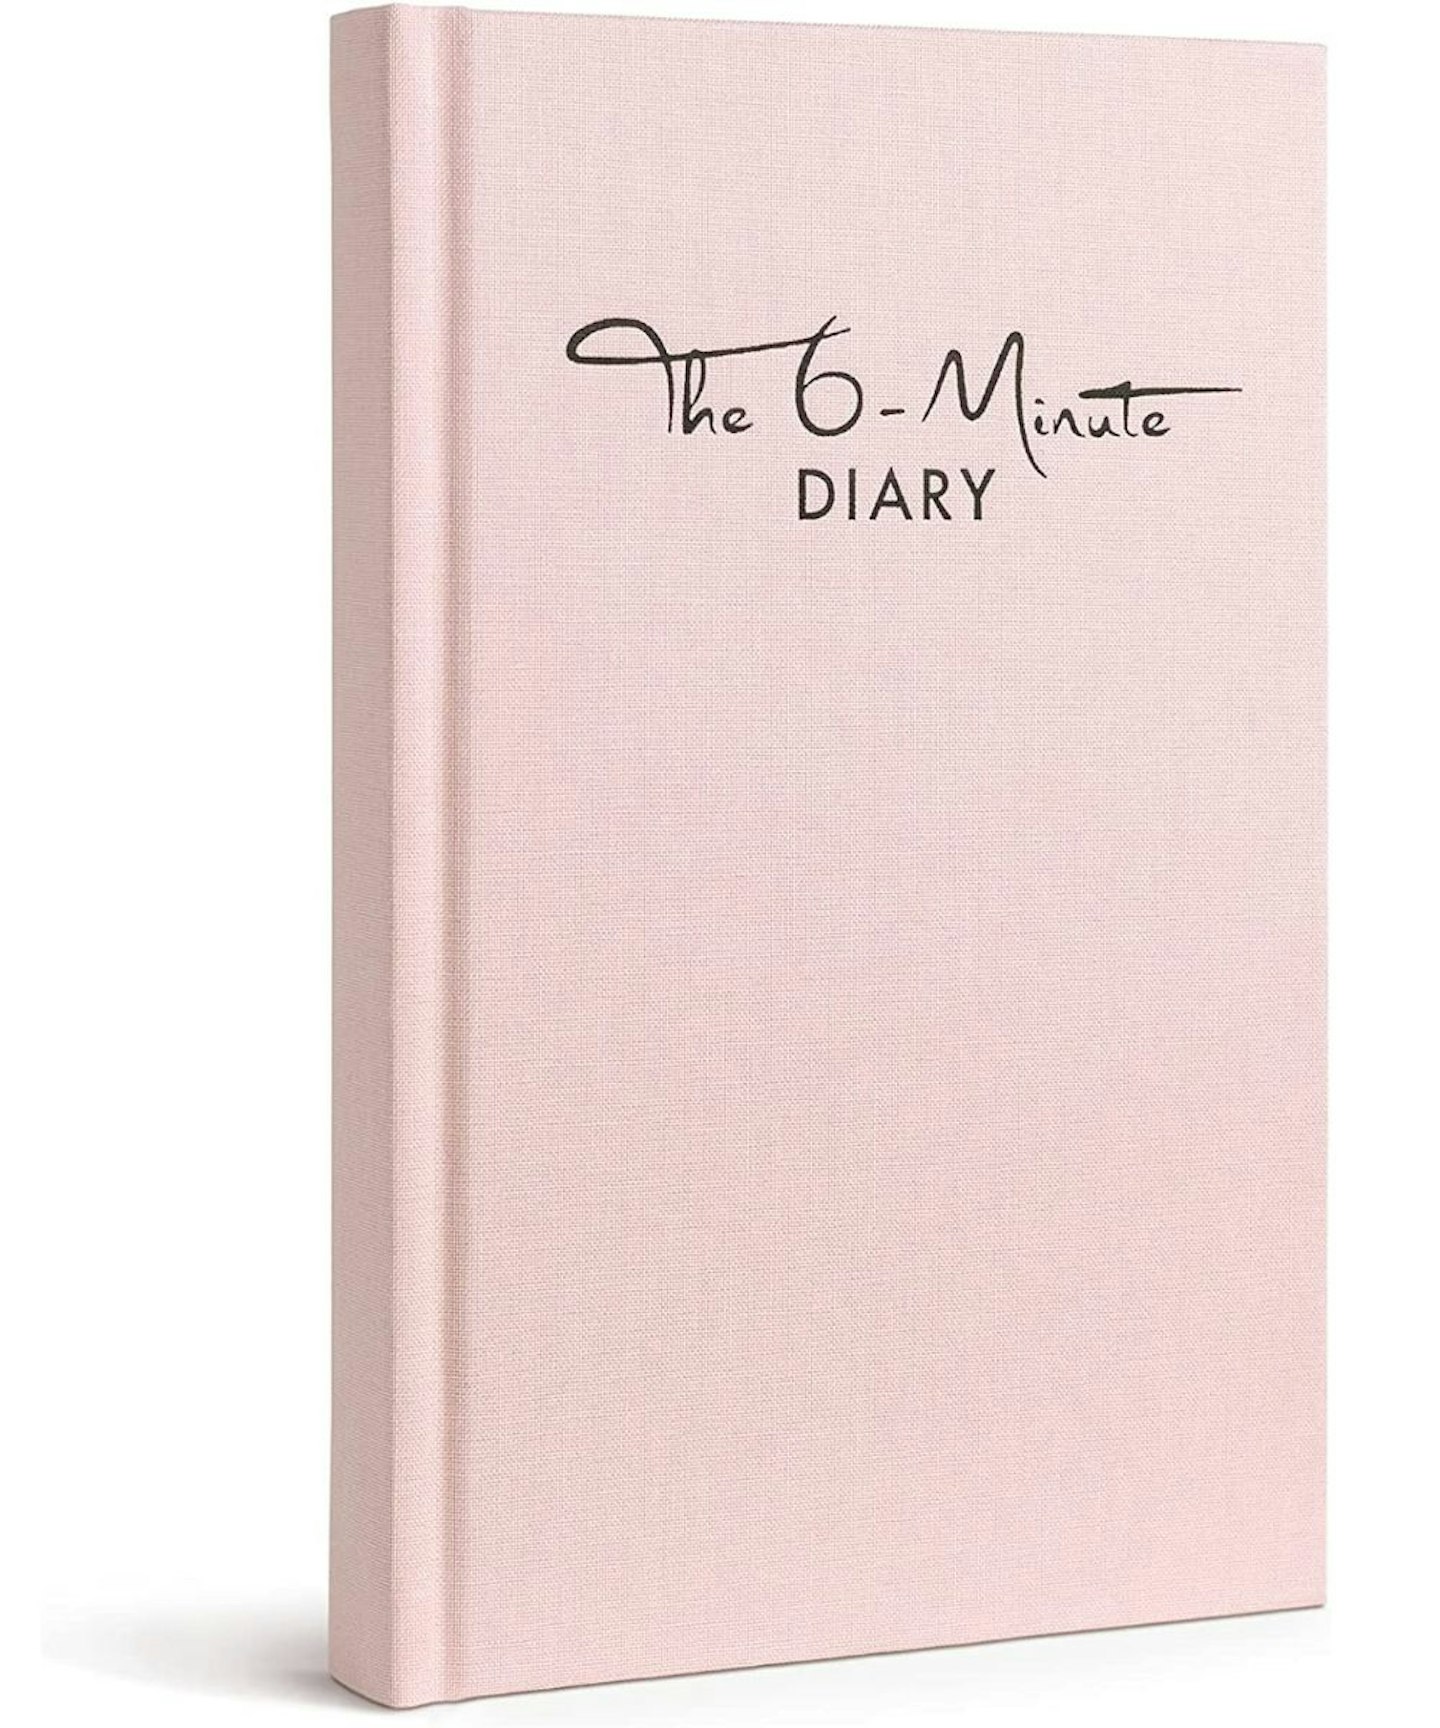  The 6-Minute Diary (The Original)